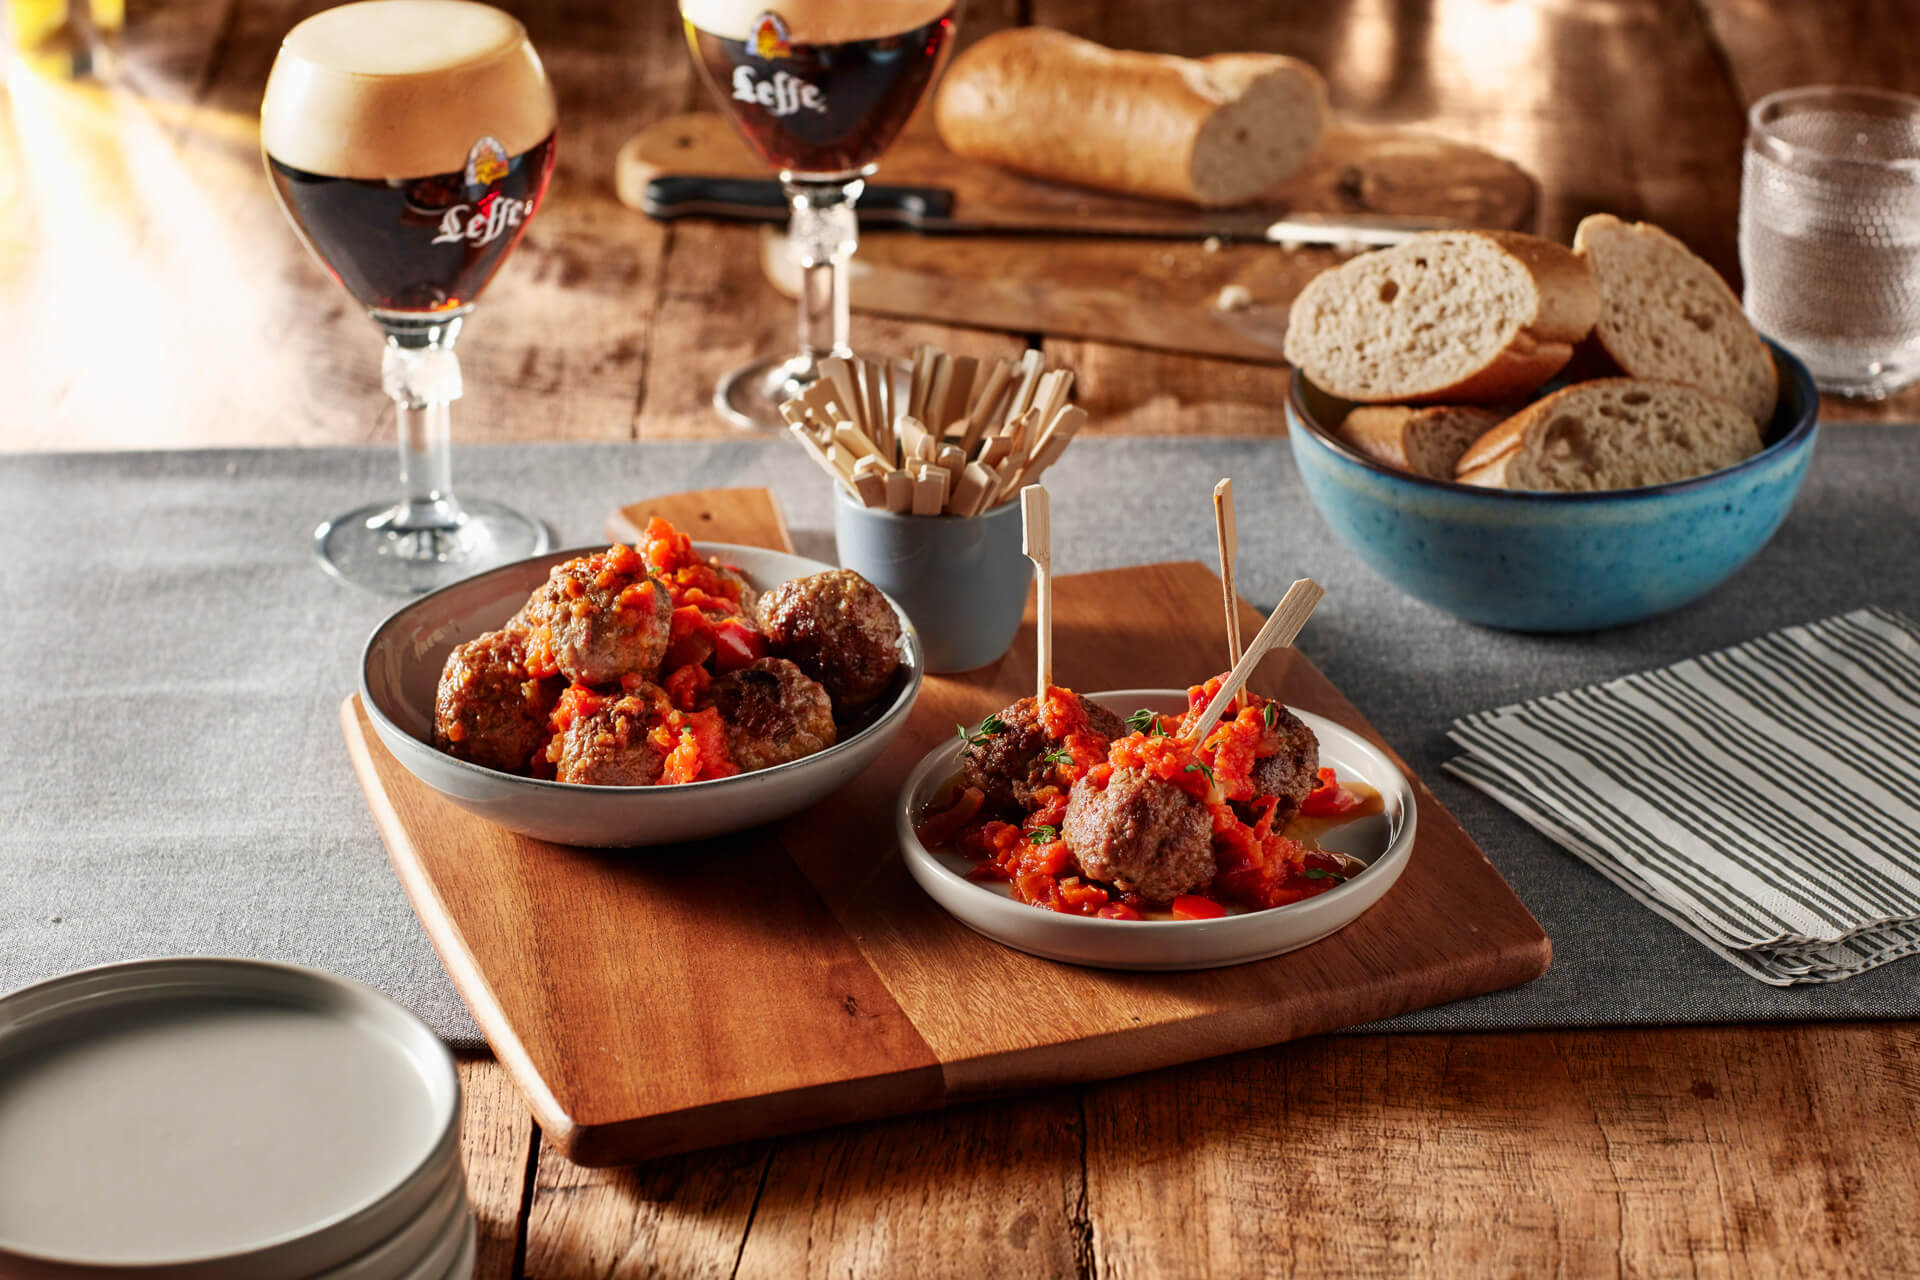 Leffe - food photography by Erik de Koning - meatballs and a glasses of beer